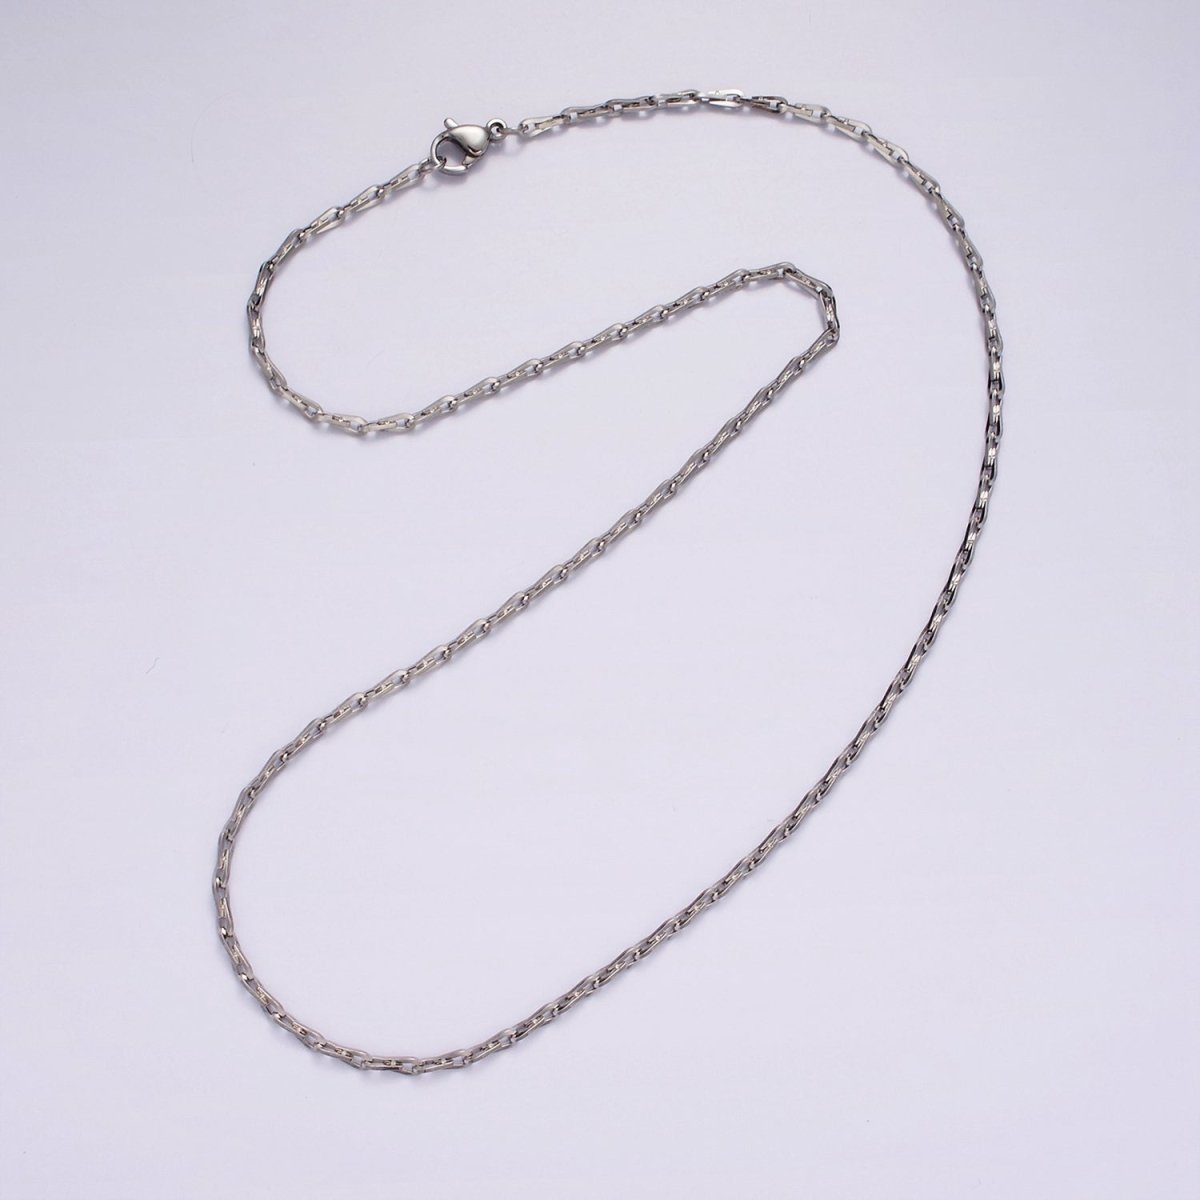 Dainty 18 inch Stainless Steel Horse shoe Barleycorn chain Necklace 2.1mm width Unique Horseshoe Link Chain | WA-2389 Clearance Pricing - DLUXCA